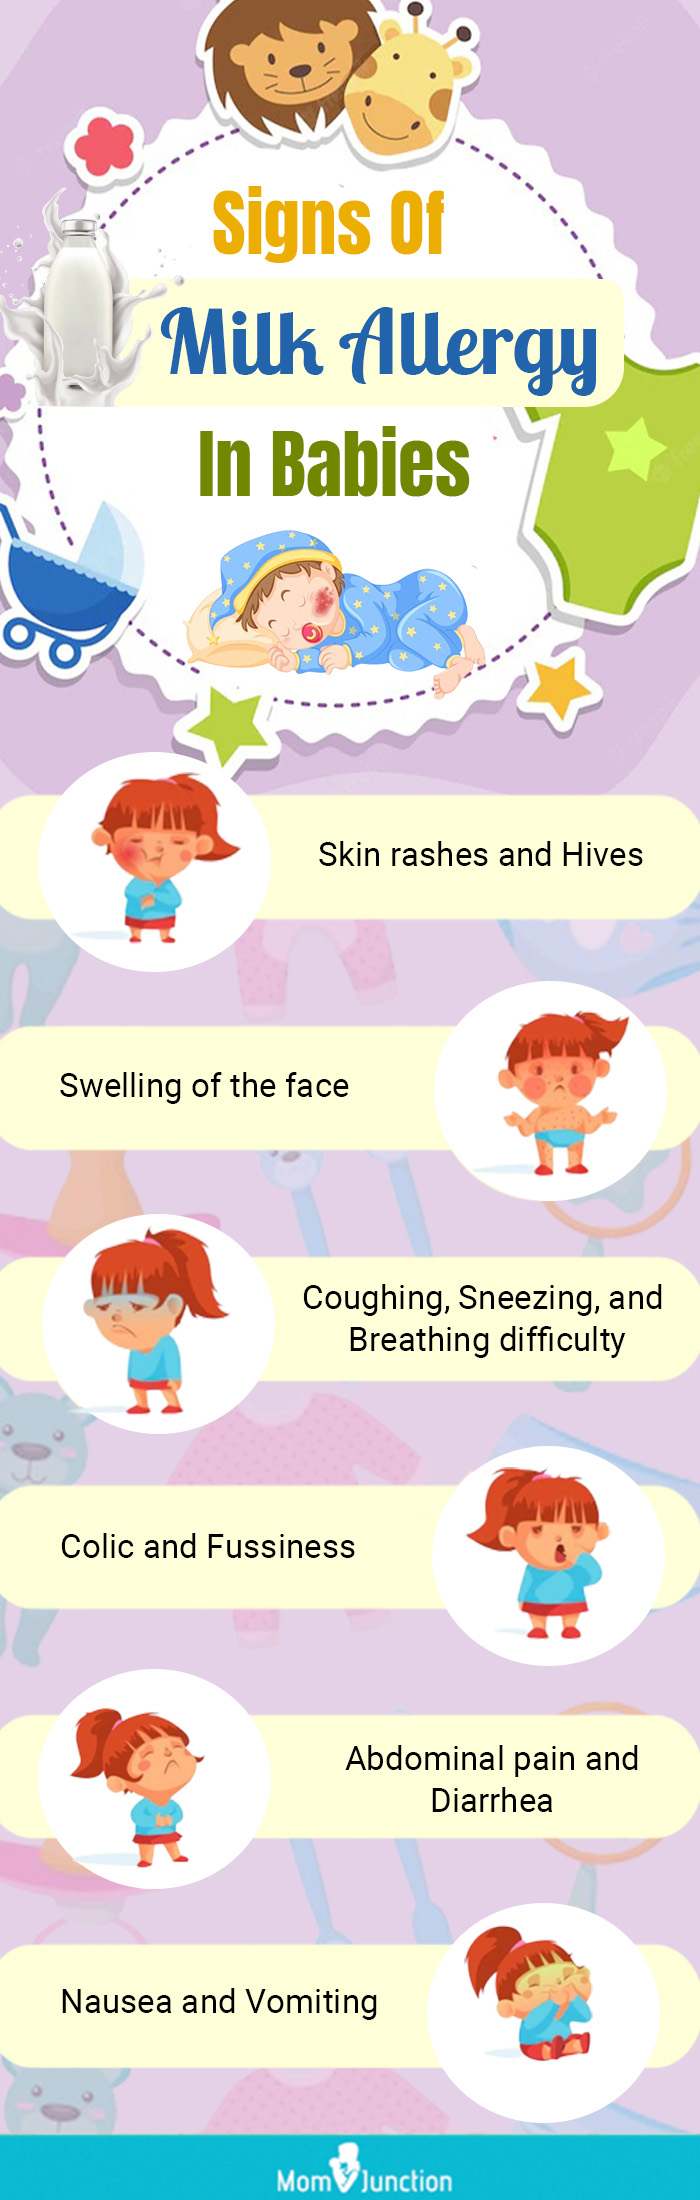 signs of milk allergy in babies [infographic]